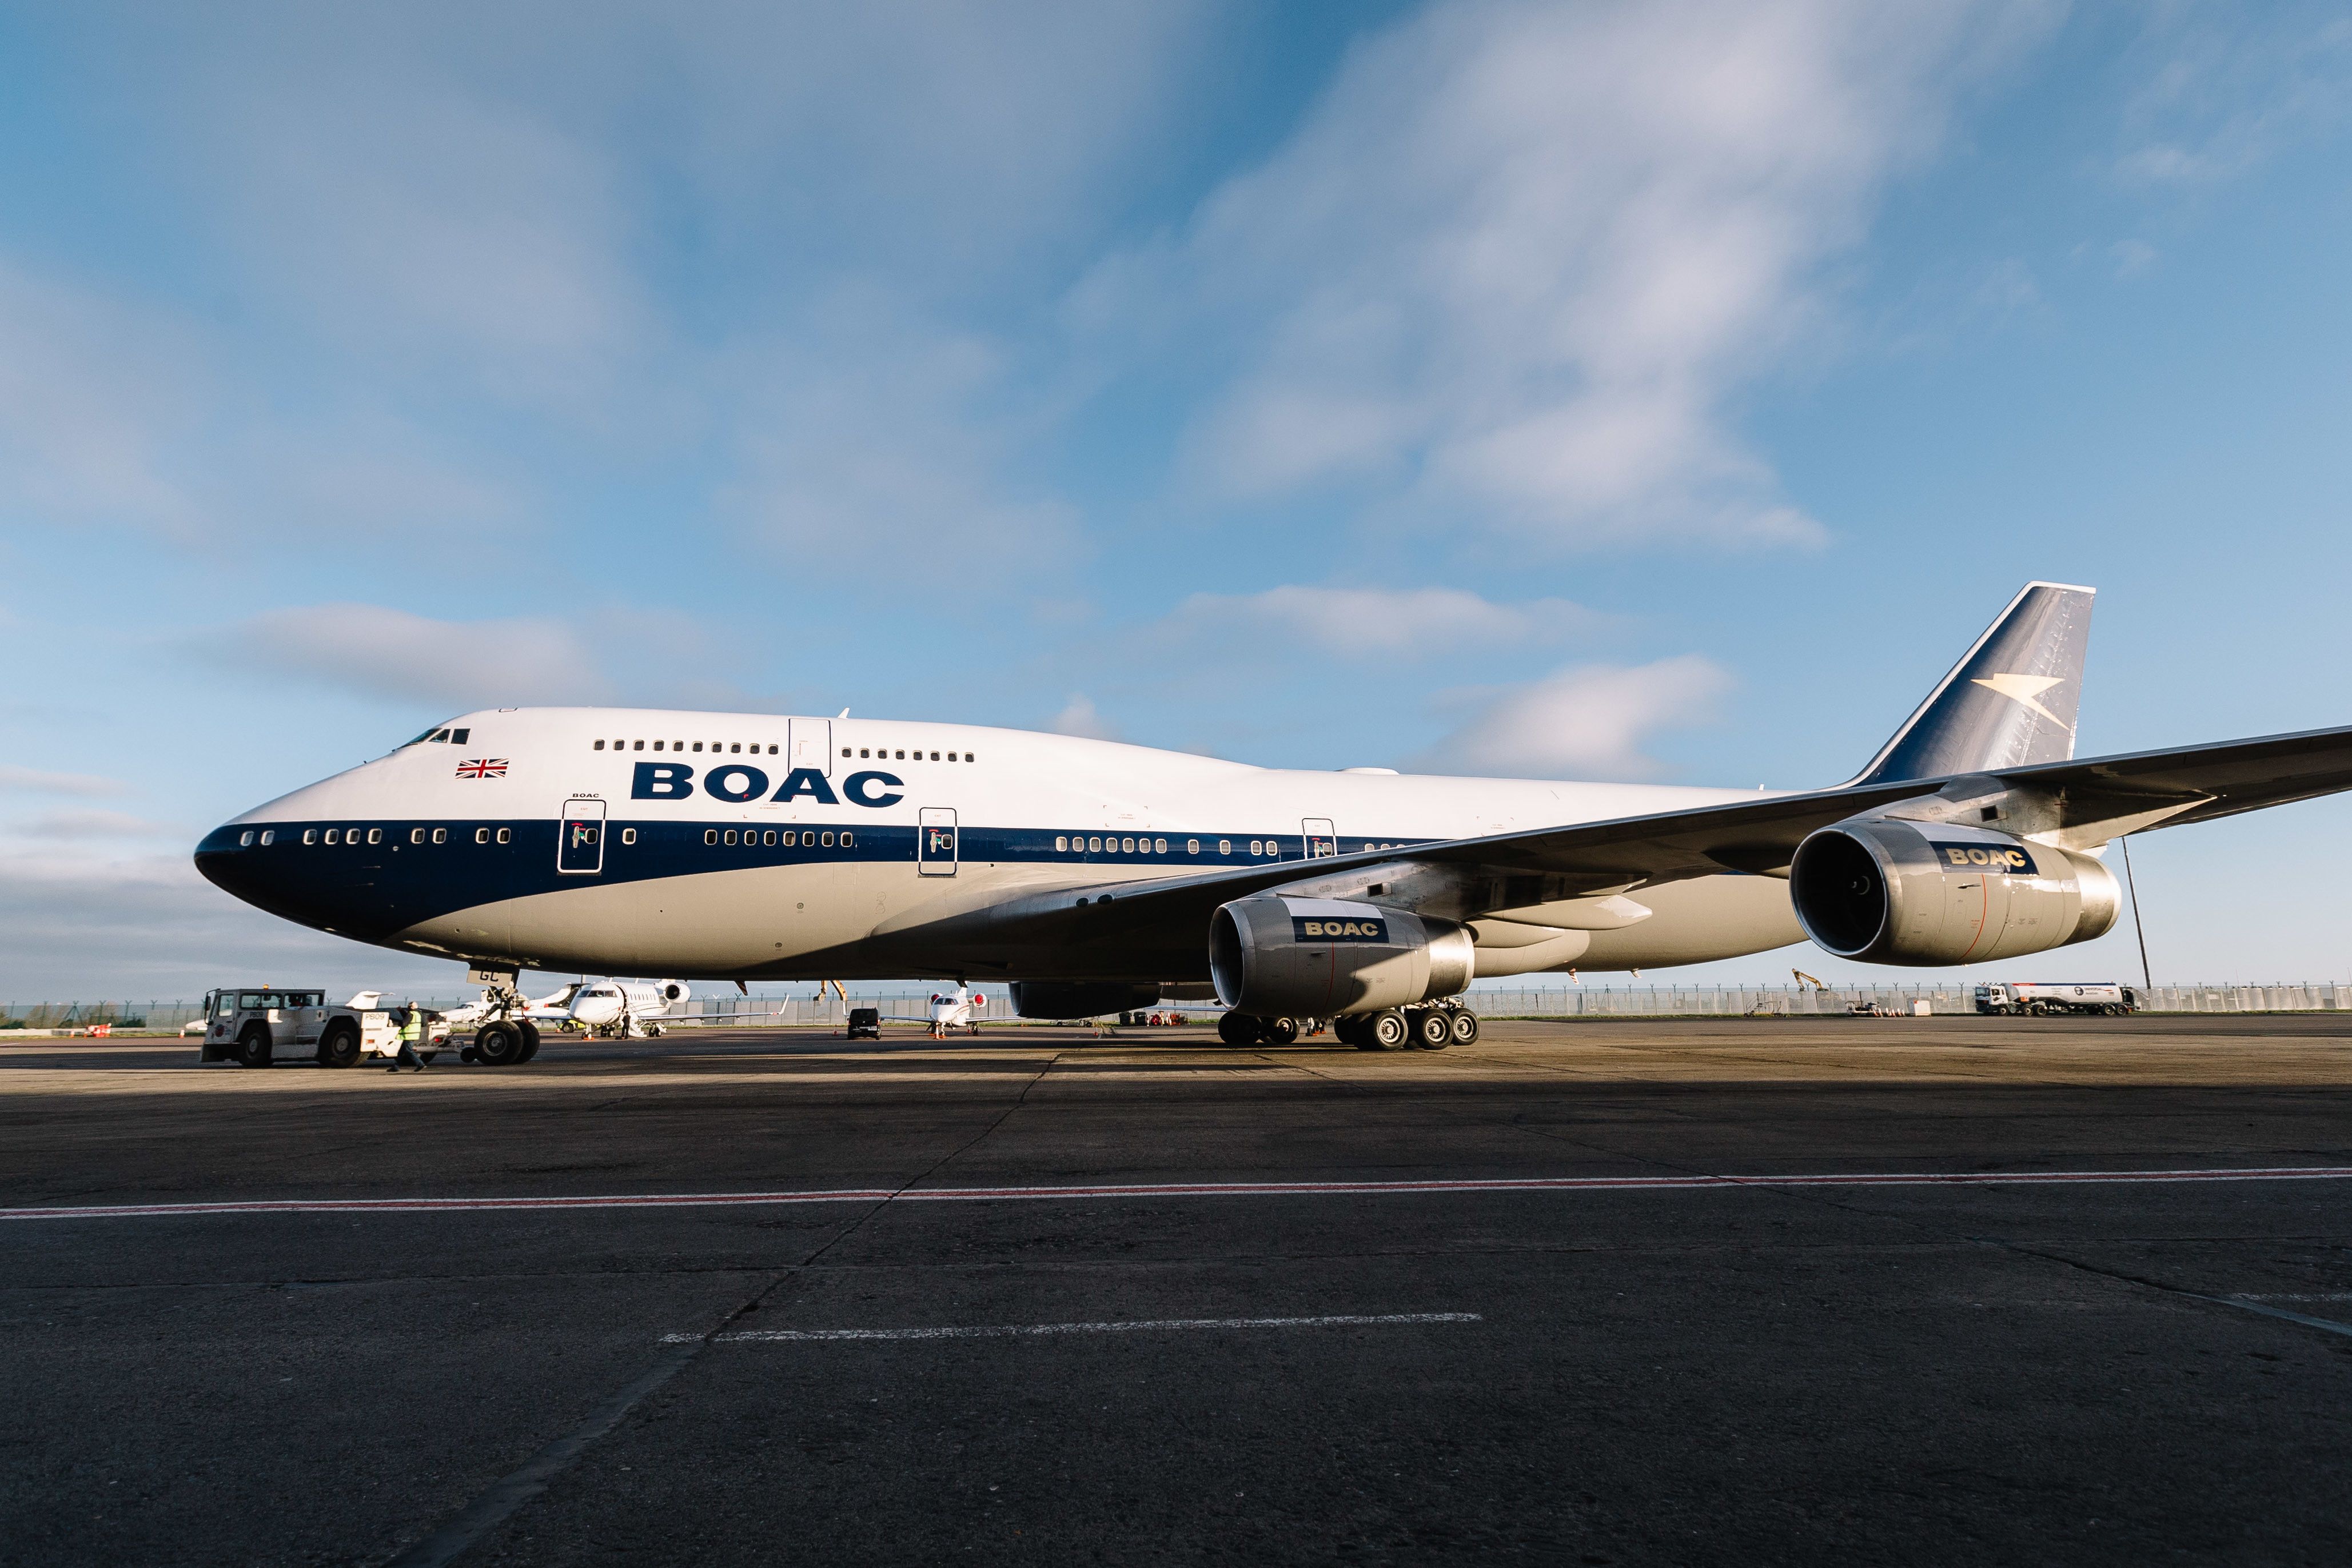 A British Airways Boeing 747 in retro BOAC livery being pushed back.